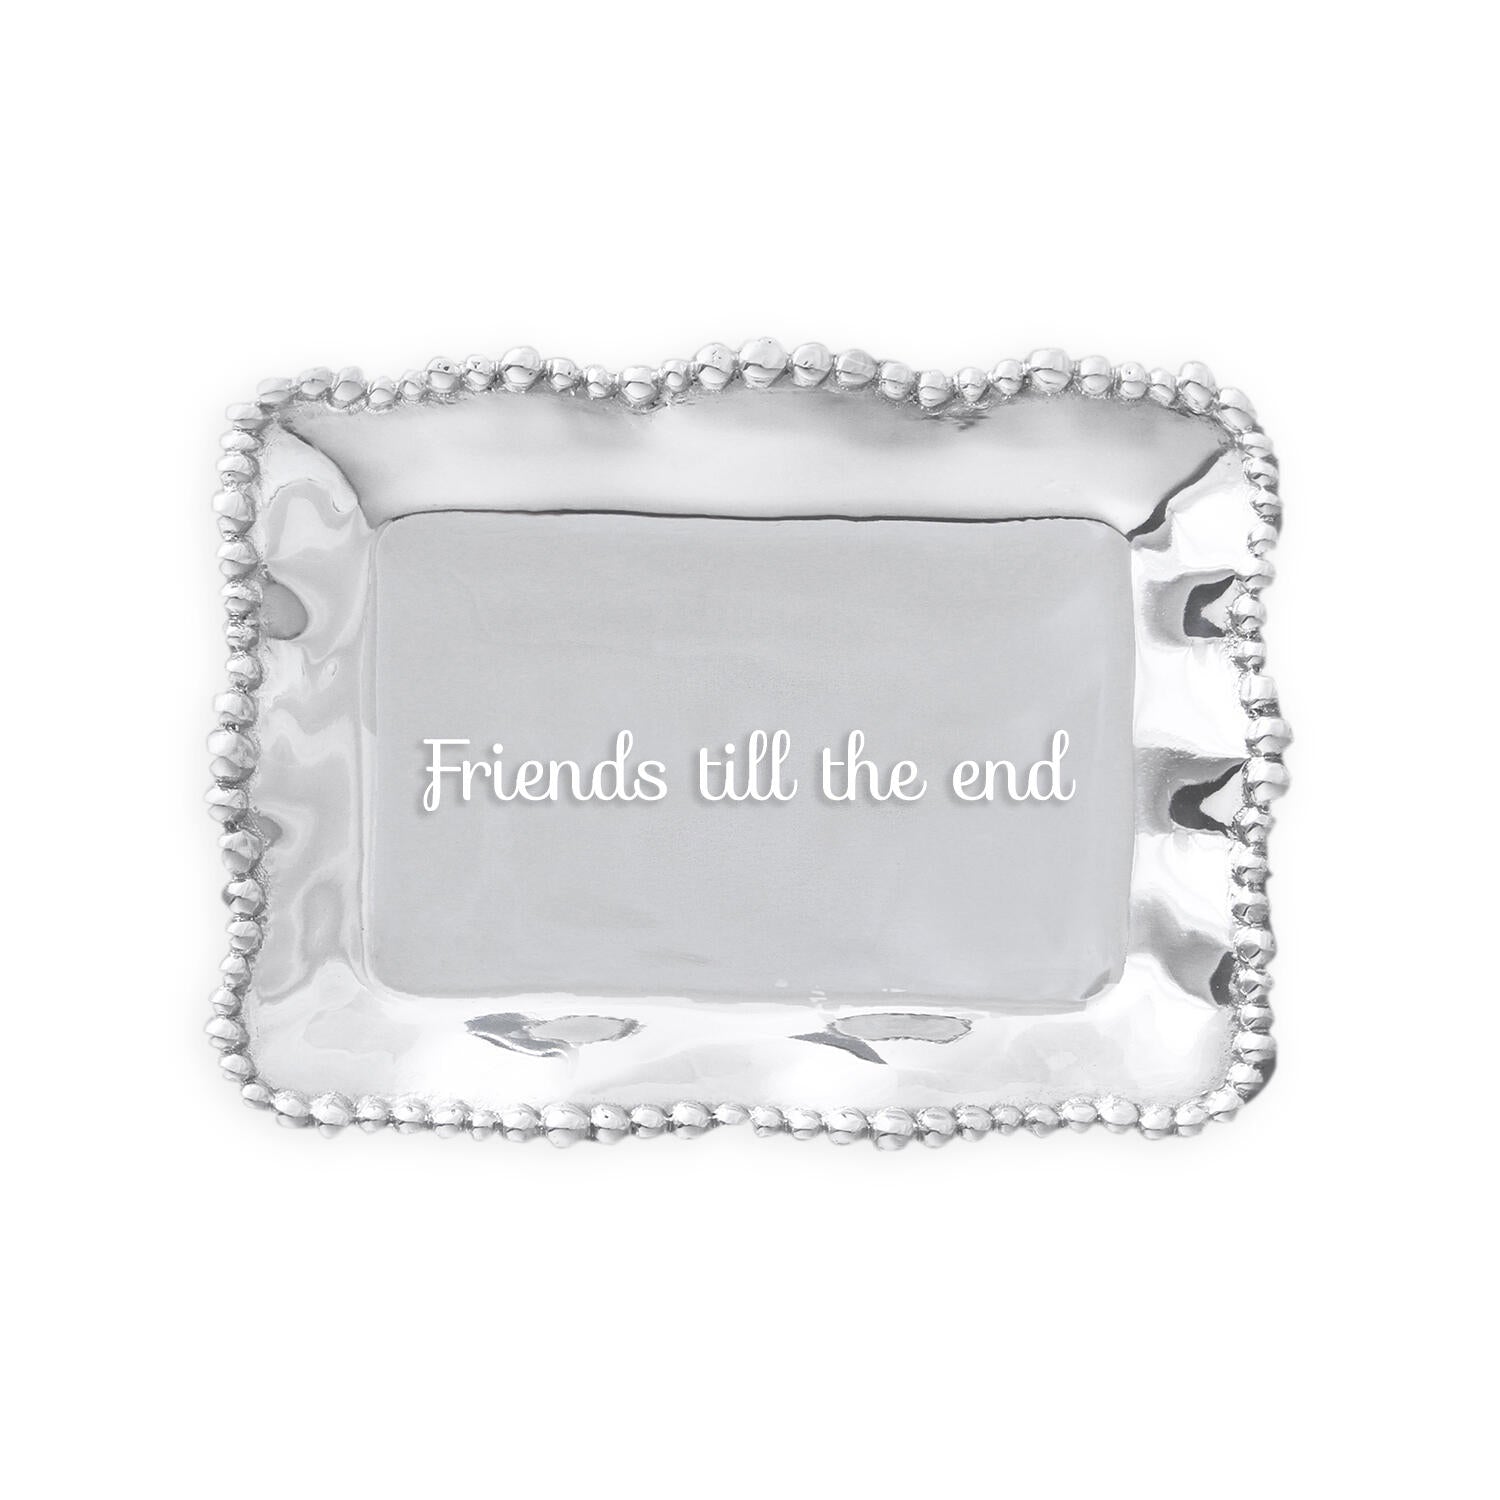 GIFTABLES Organic Pearl Rectangular Engraved Tray - Friends till the end